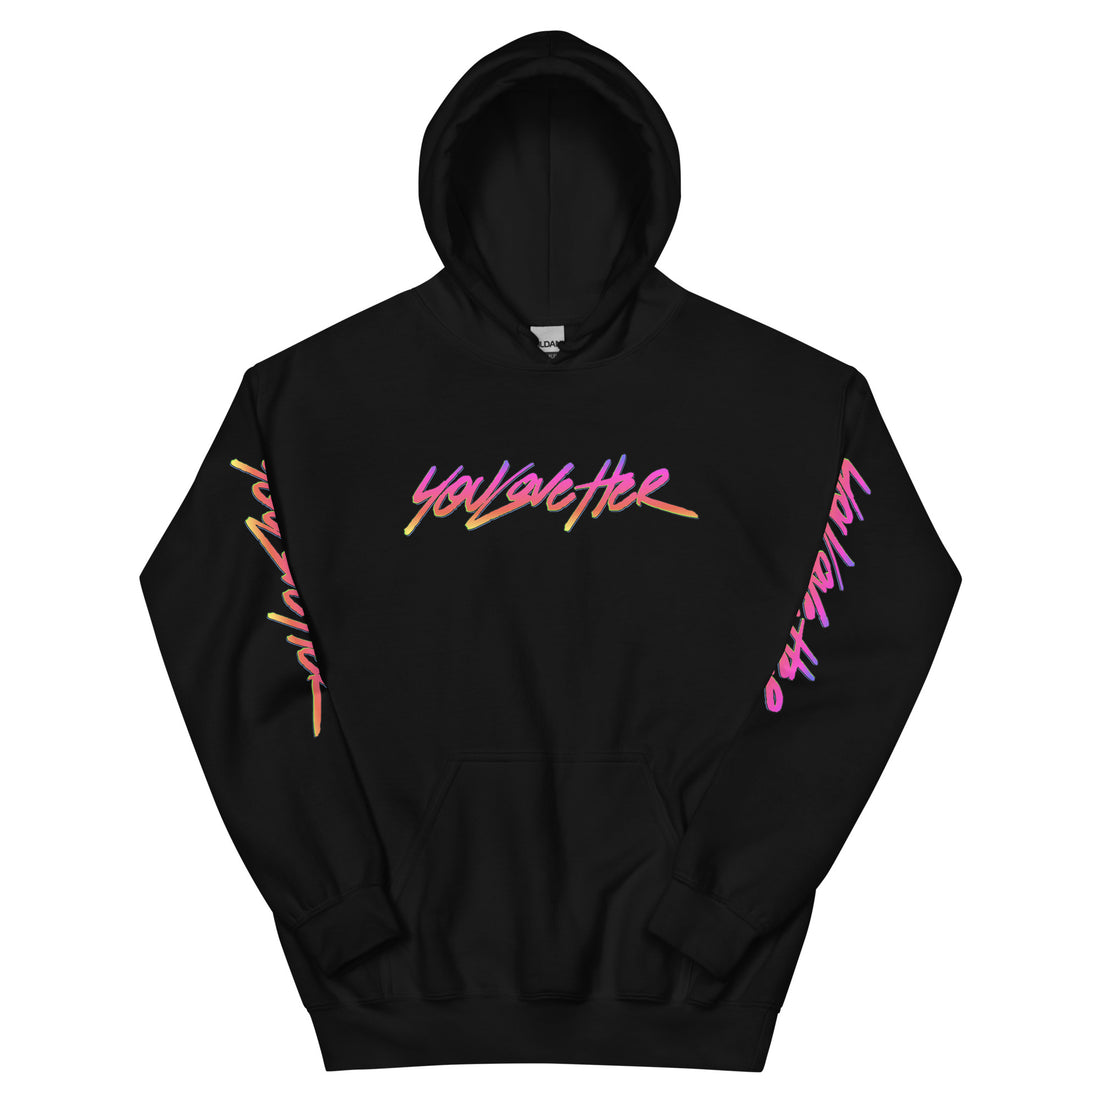 YOU LOVE HER SYNTHWAVE LOGO HOODIE - YOU LOVE HER